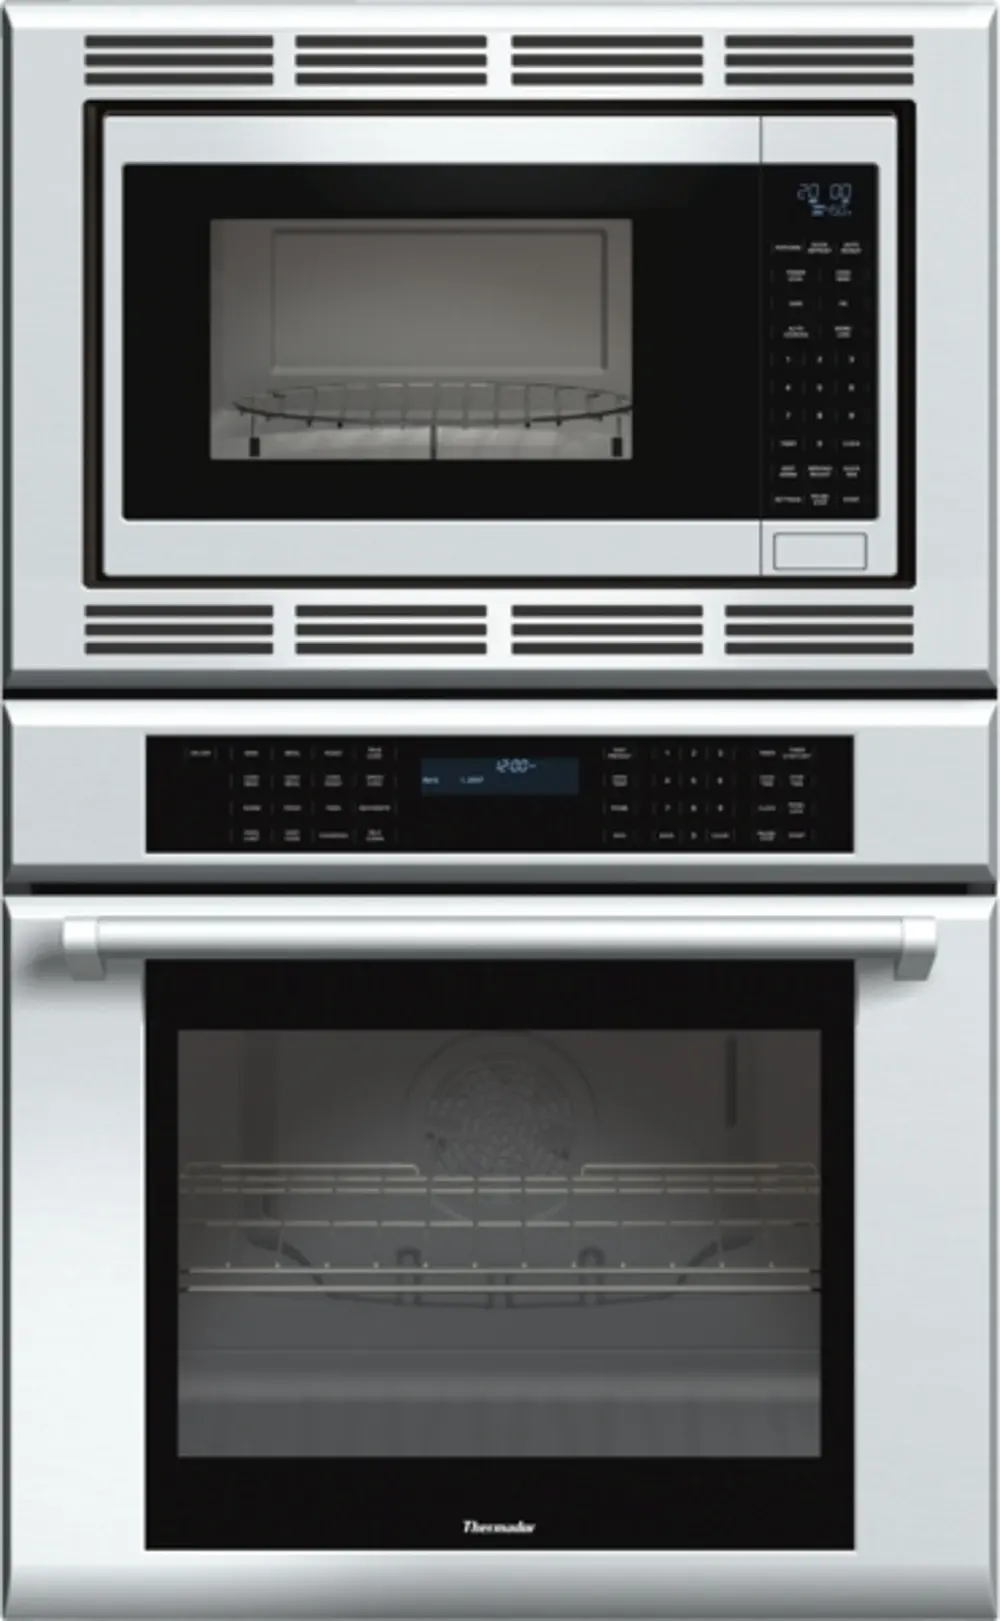 MEDMC301JP Thermador 30 inch Masterpiece Series Combination Oven (oven and convection microwave) with professional handle MEDMC301JP -1